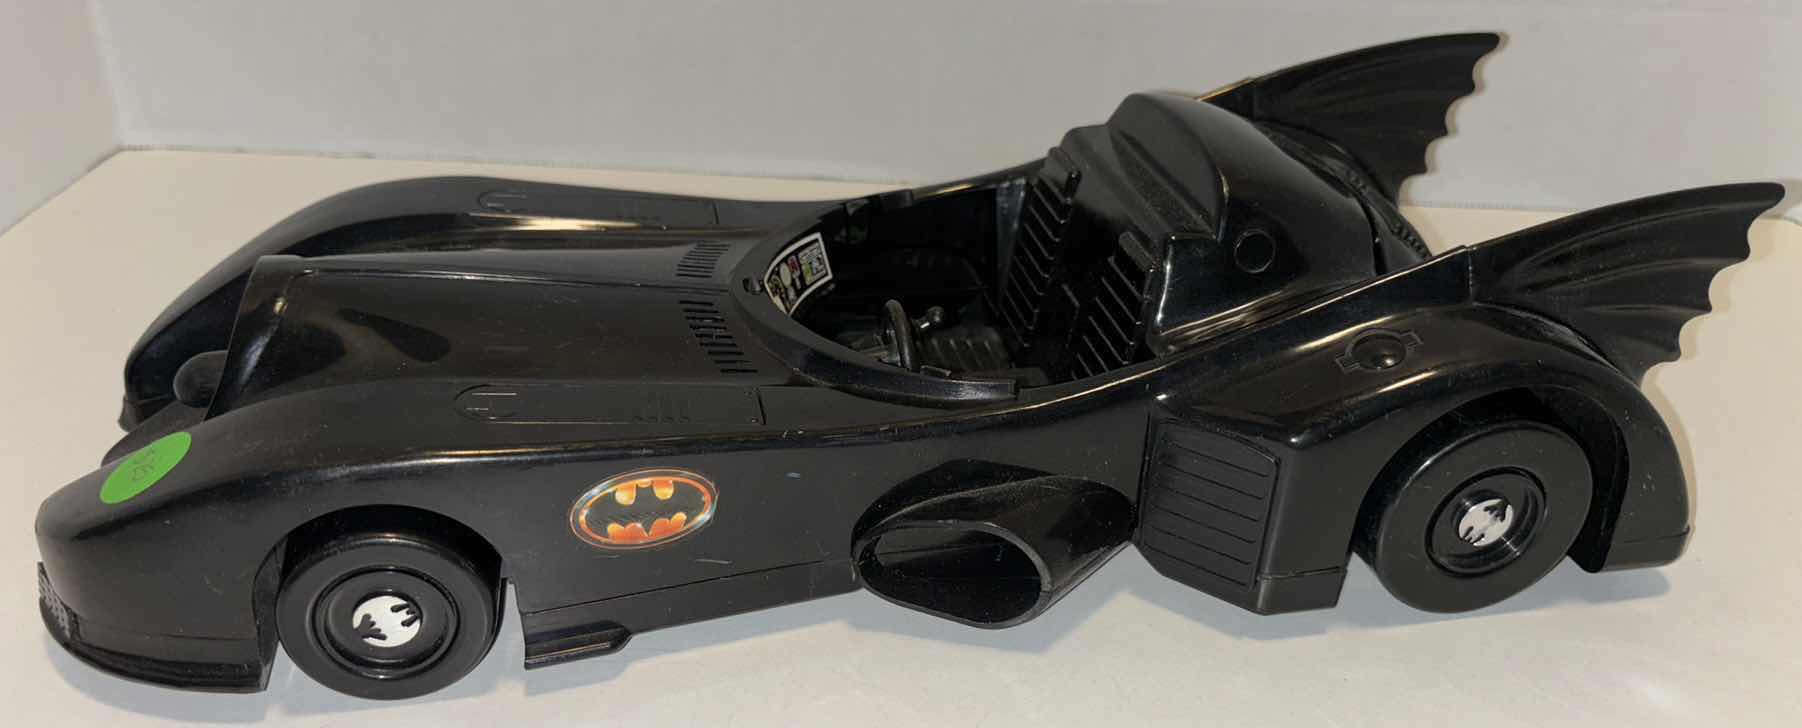 Photo 7 of ASSORTED VERSIONS OF BATMOBILE VEHICLES (3)